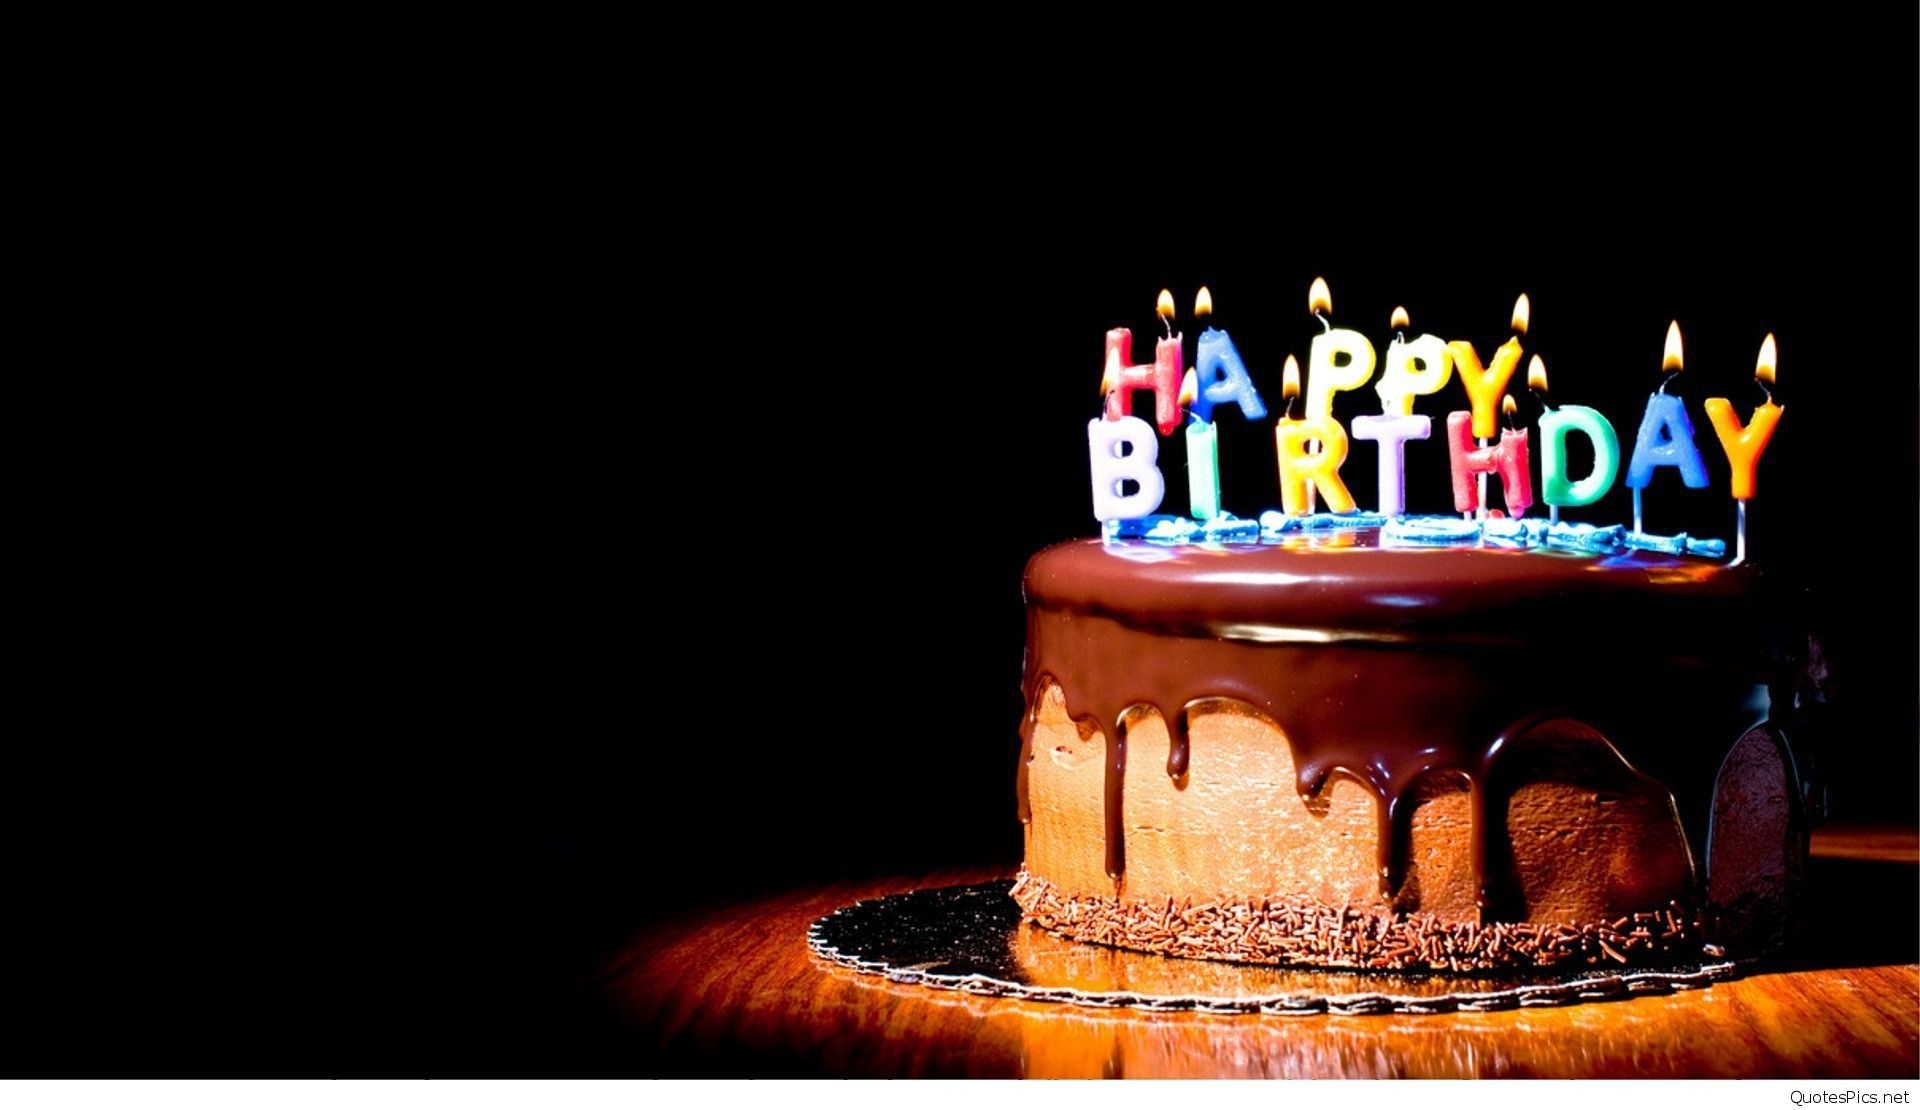 10 Best Happy Bday Hd Wallpaper FULL HD 1080p For PC Background